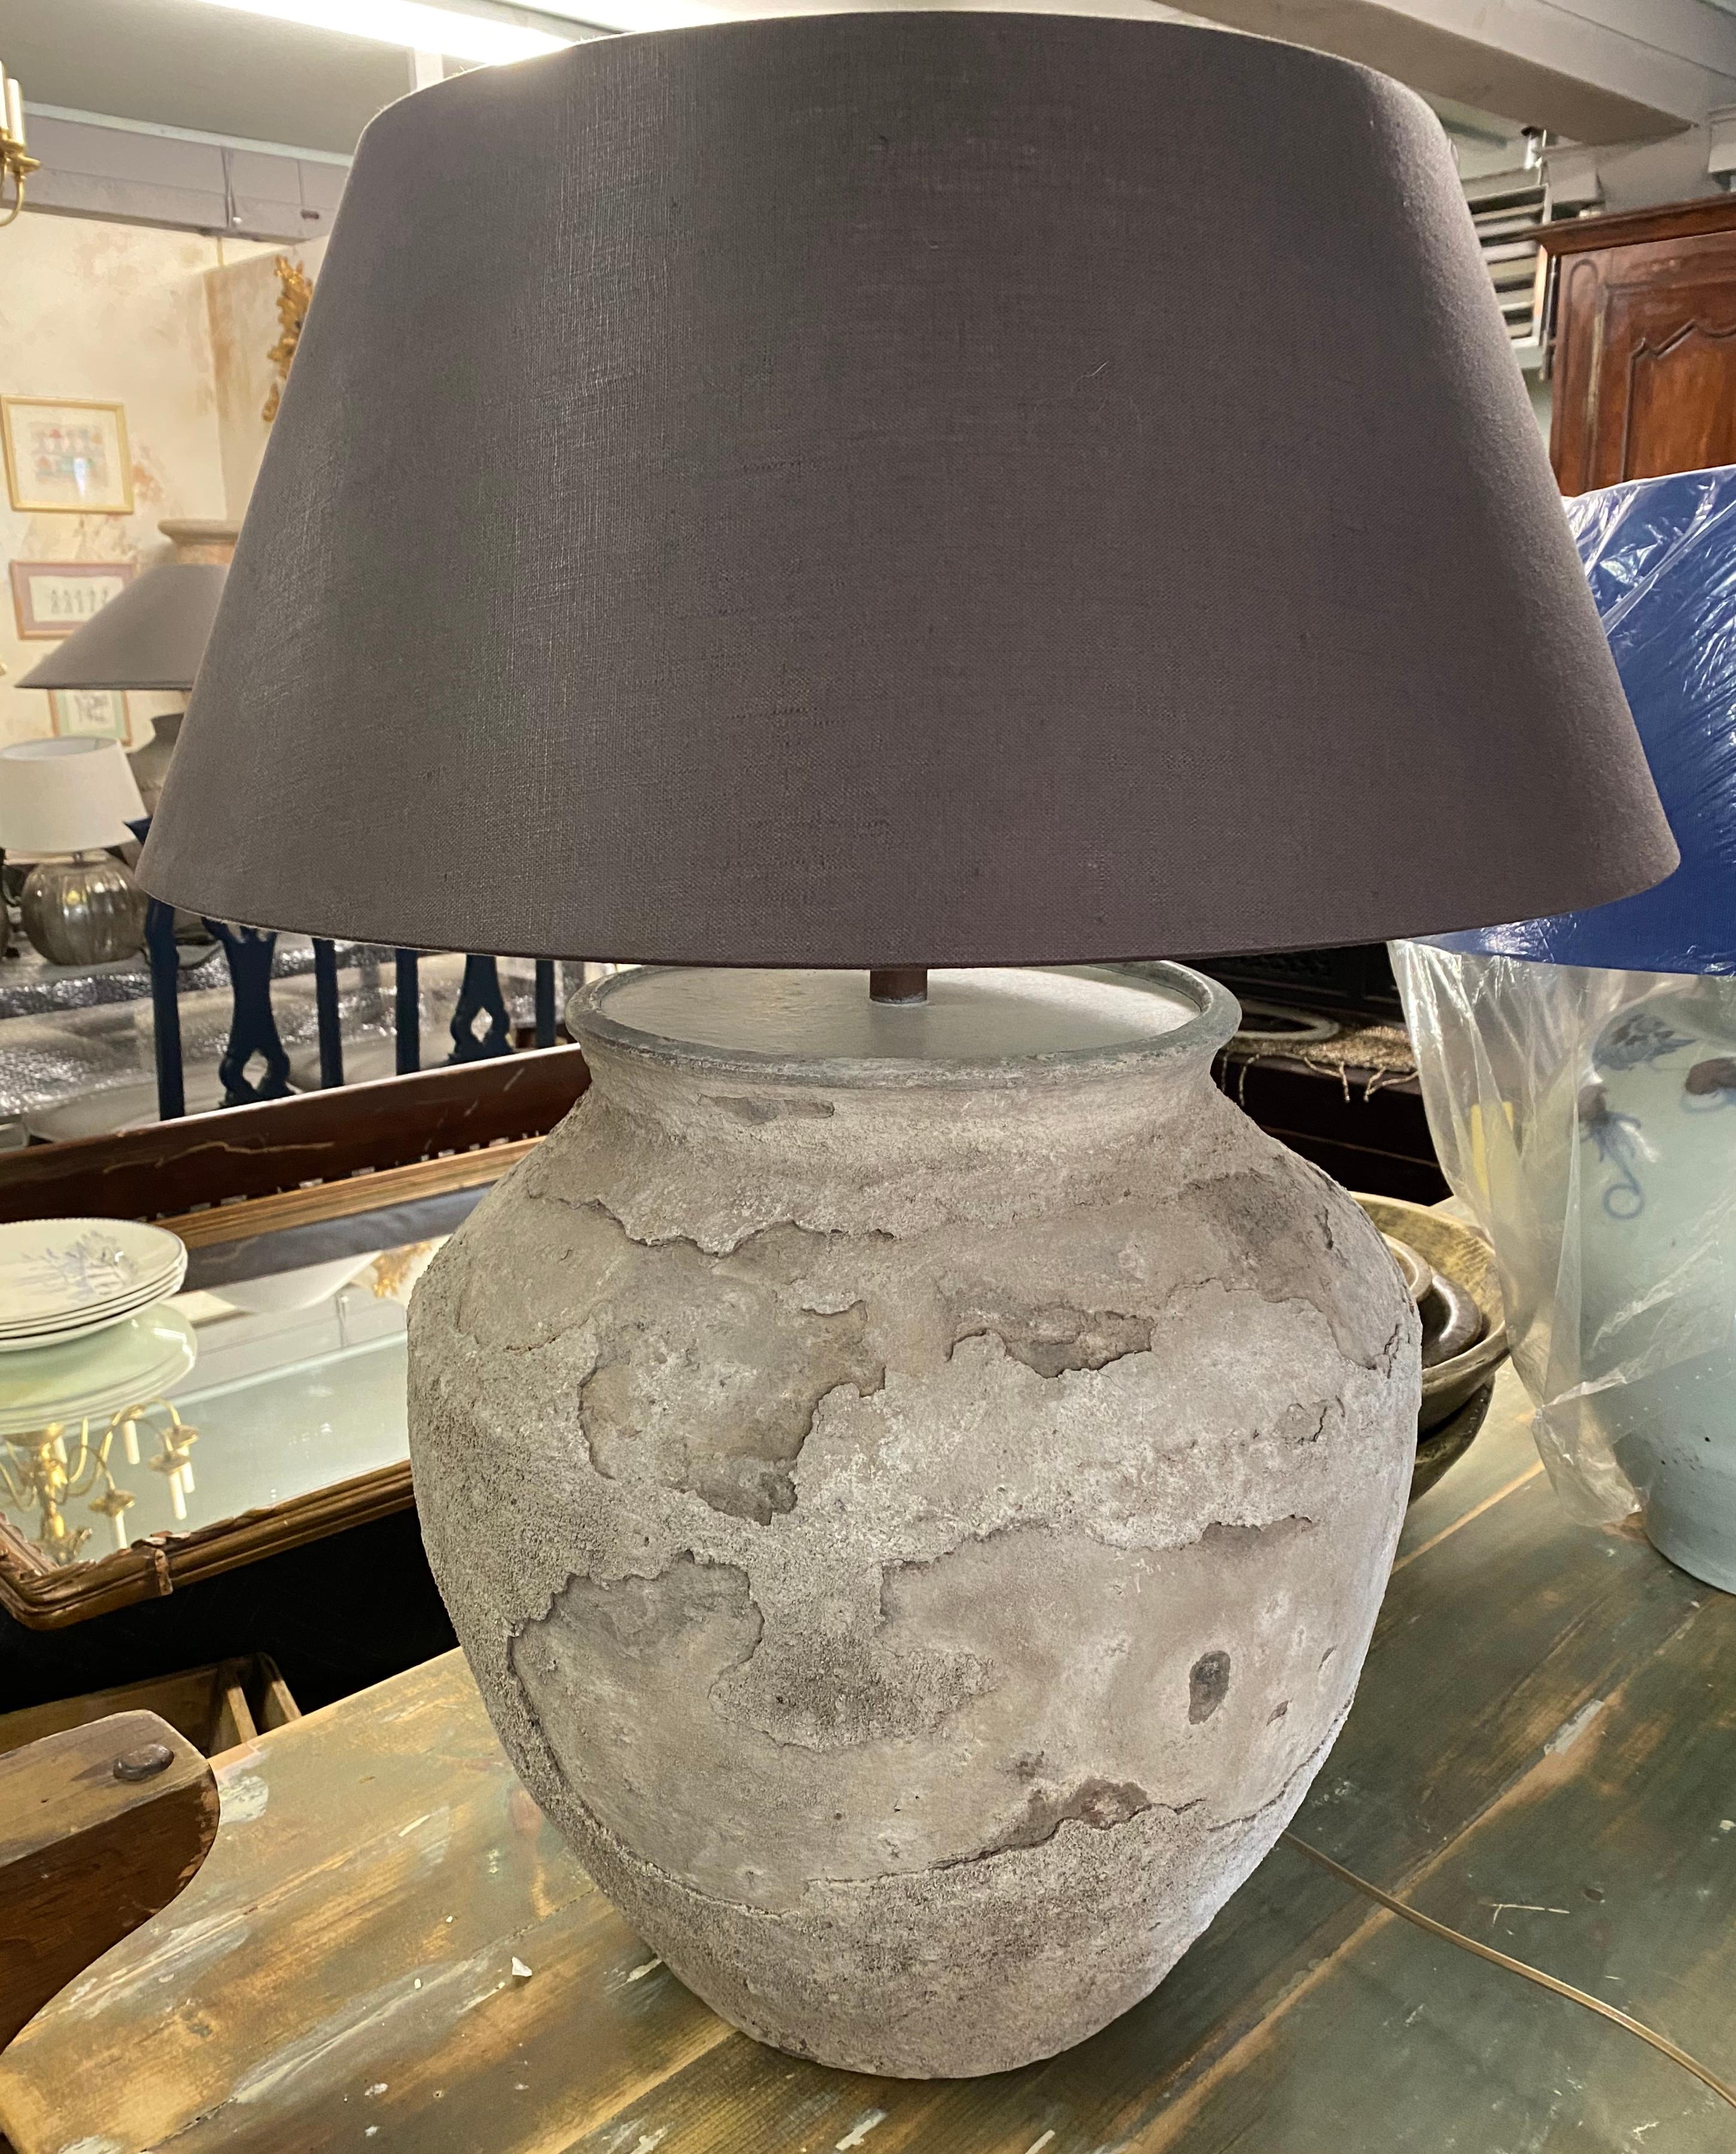 Impressive large rustic organic Chinese unglazed terracotta storage jar that has been made into a table lamp. The vase has beautiful aged patina from being buried perhaps for centuries. Handmade drum shape Belgium linen lampshade included.
 